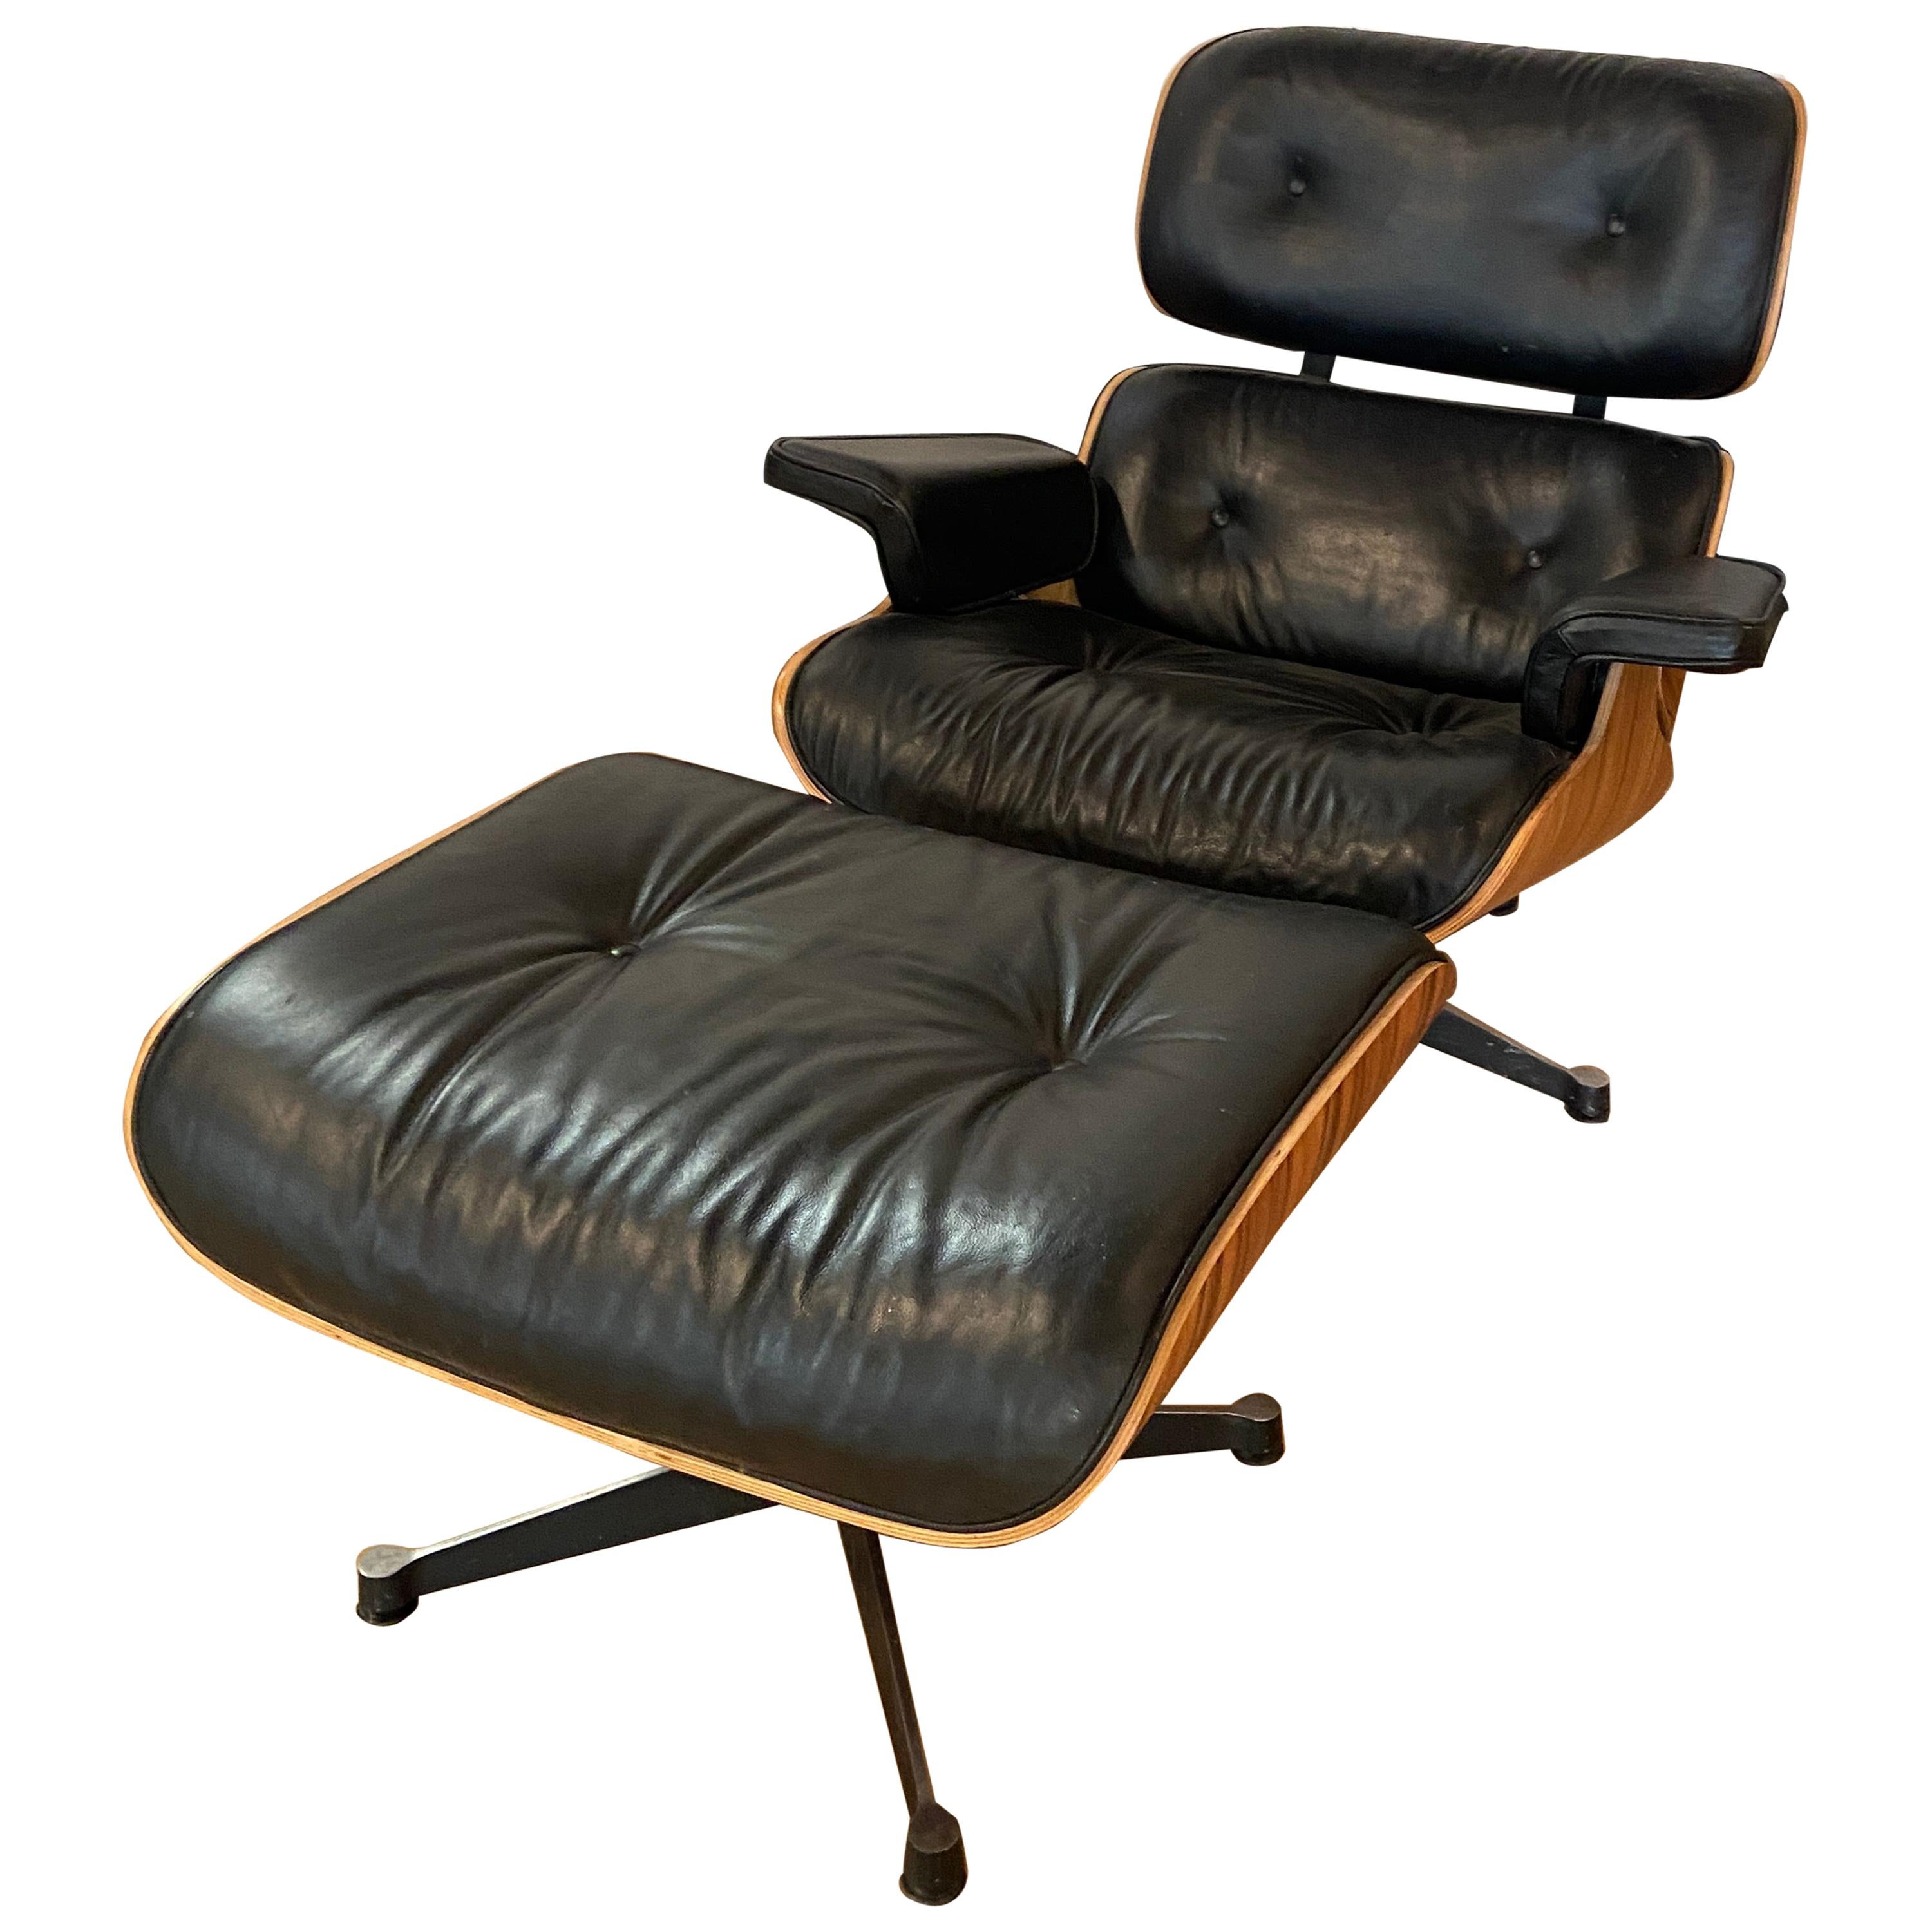 Mid-Century Modern Lounge Chair with Ottoman in the Style of Charles Eames 1970s